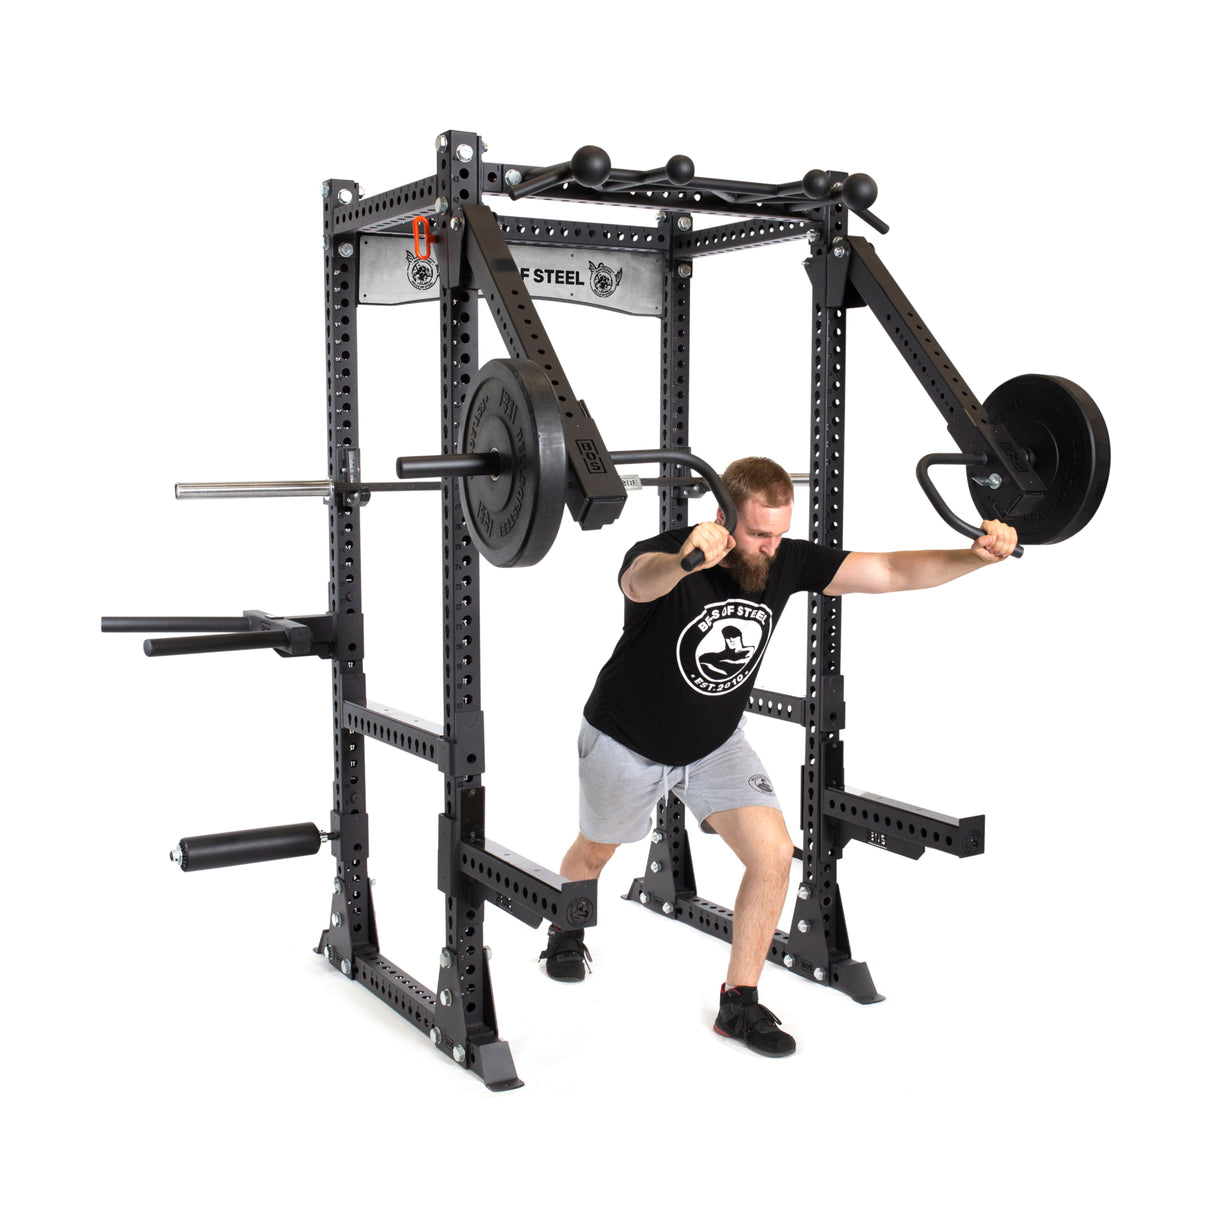 product picture of Manticore Flat Foot Power Rack PREBUILT with male model using lever arms